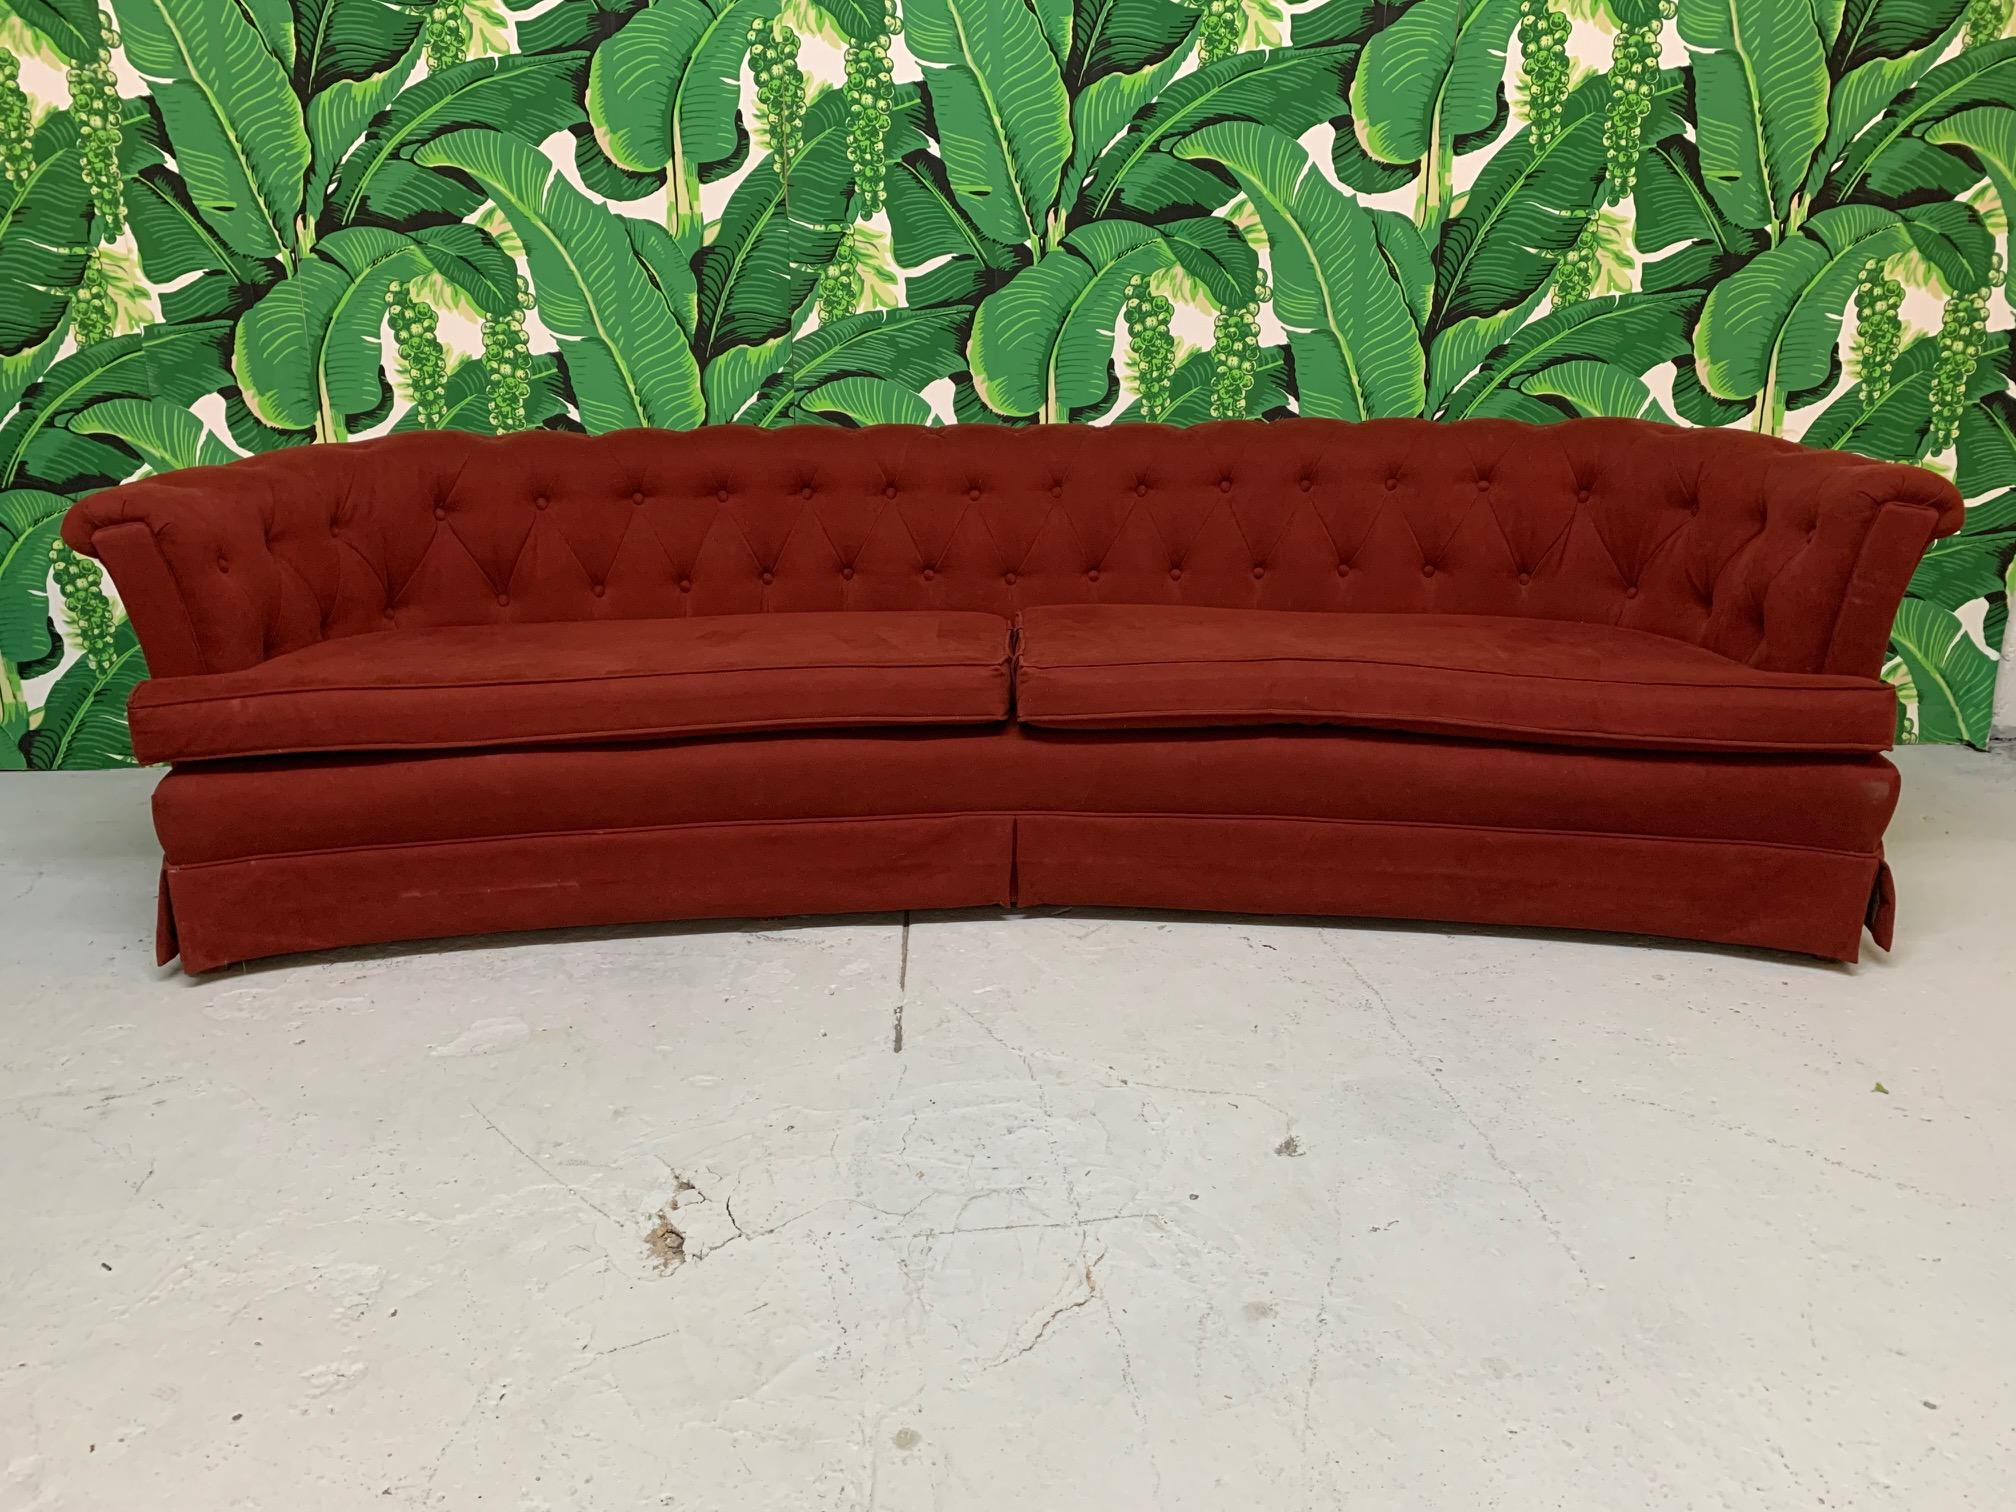 Large mid-century tufted sofa in the manner of Dorothy Draper features a curved shape and deep rich red velvet type upholstery.  Very good condition with no tears or holes and only very minor imperfections consistent with age.